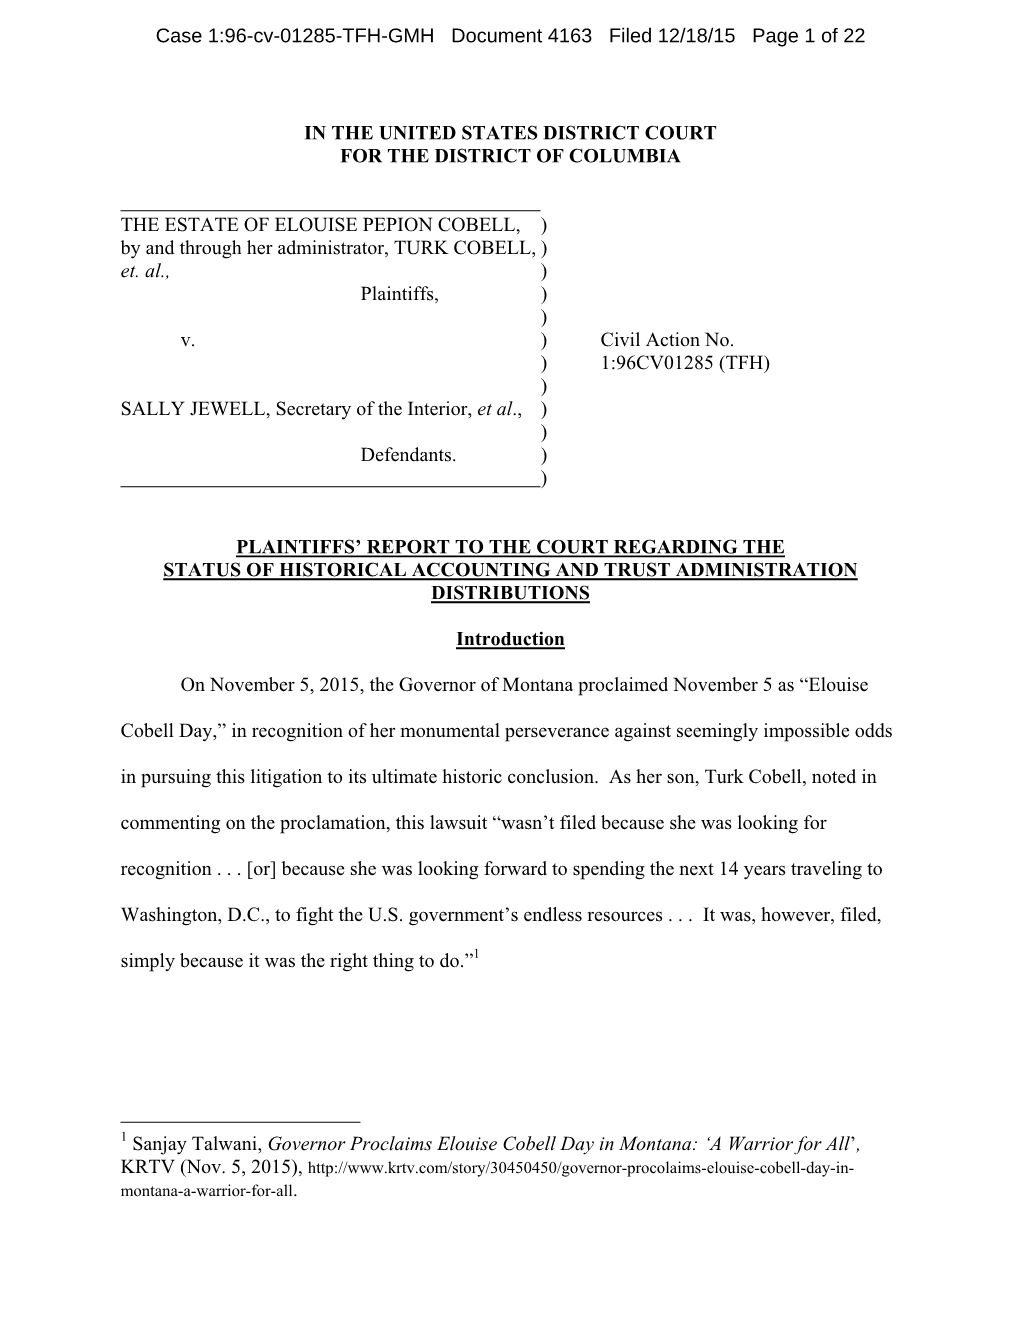 Case 1:96-Cv-01285-TFH-GMH Document 4163 Filed 12/18/15 Page 1 of 22